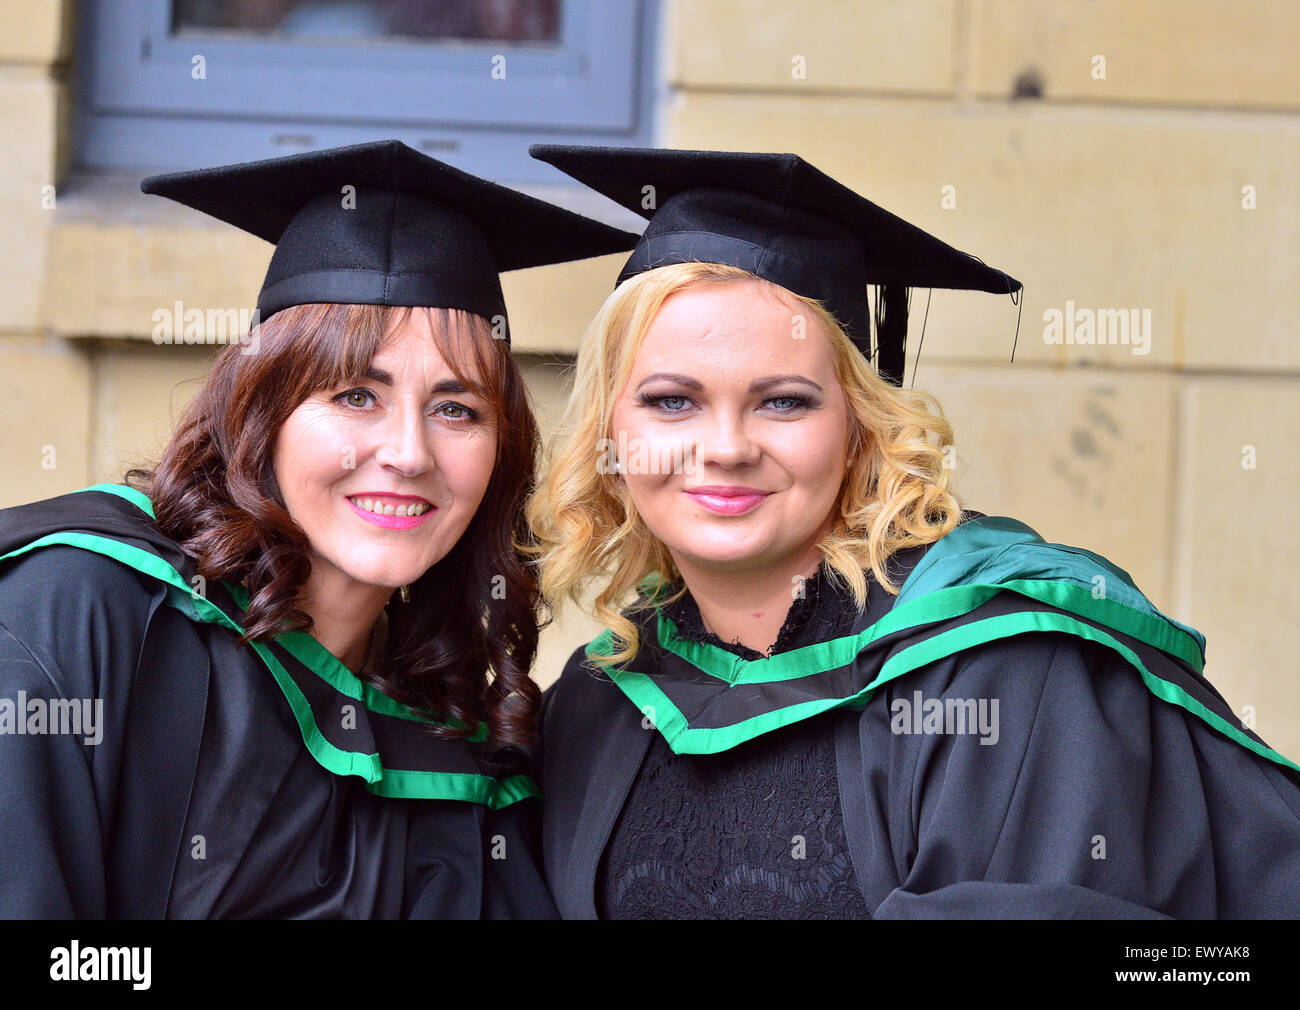 University of Ulster (Magee Campus) students pose for photographs on graduation day. Stock Photo